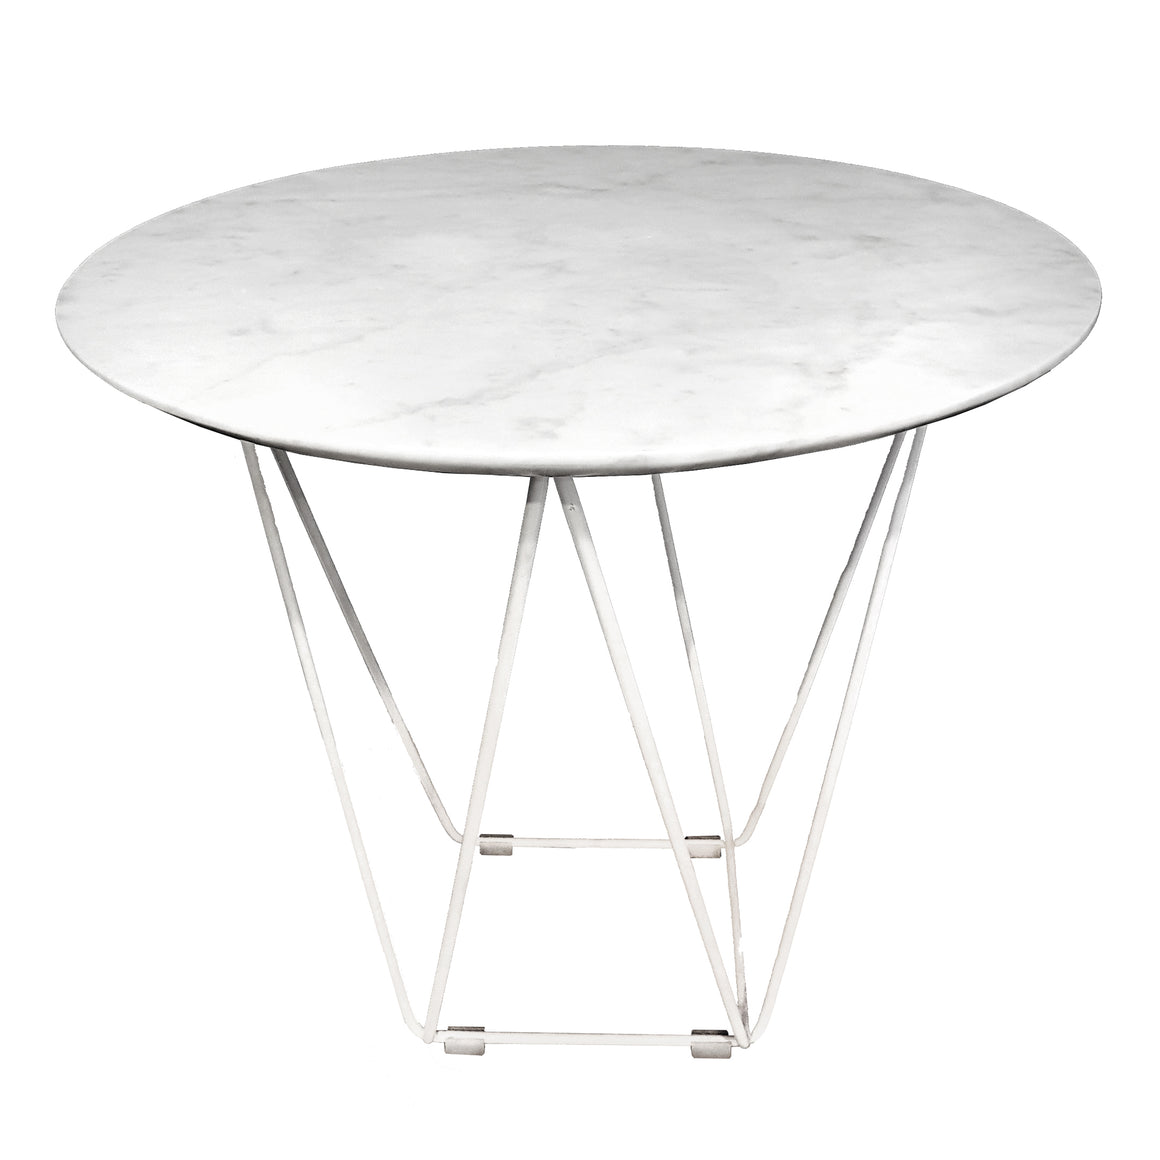 Round marble top side table